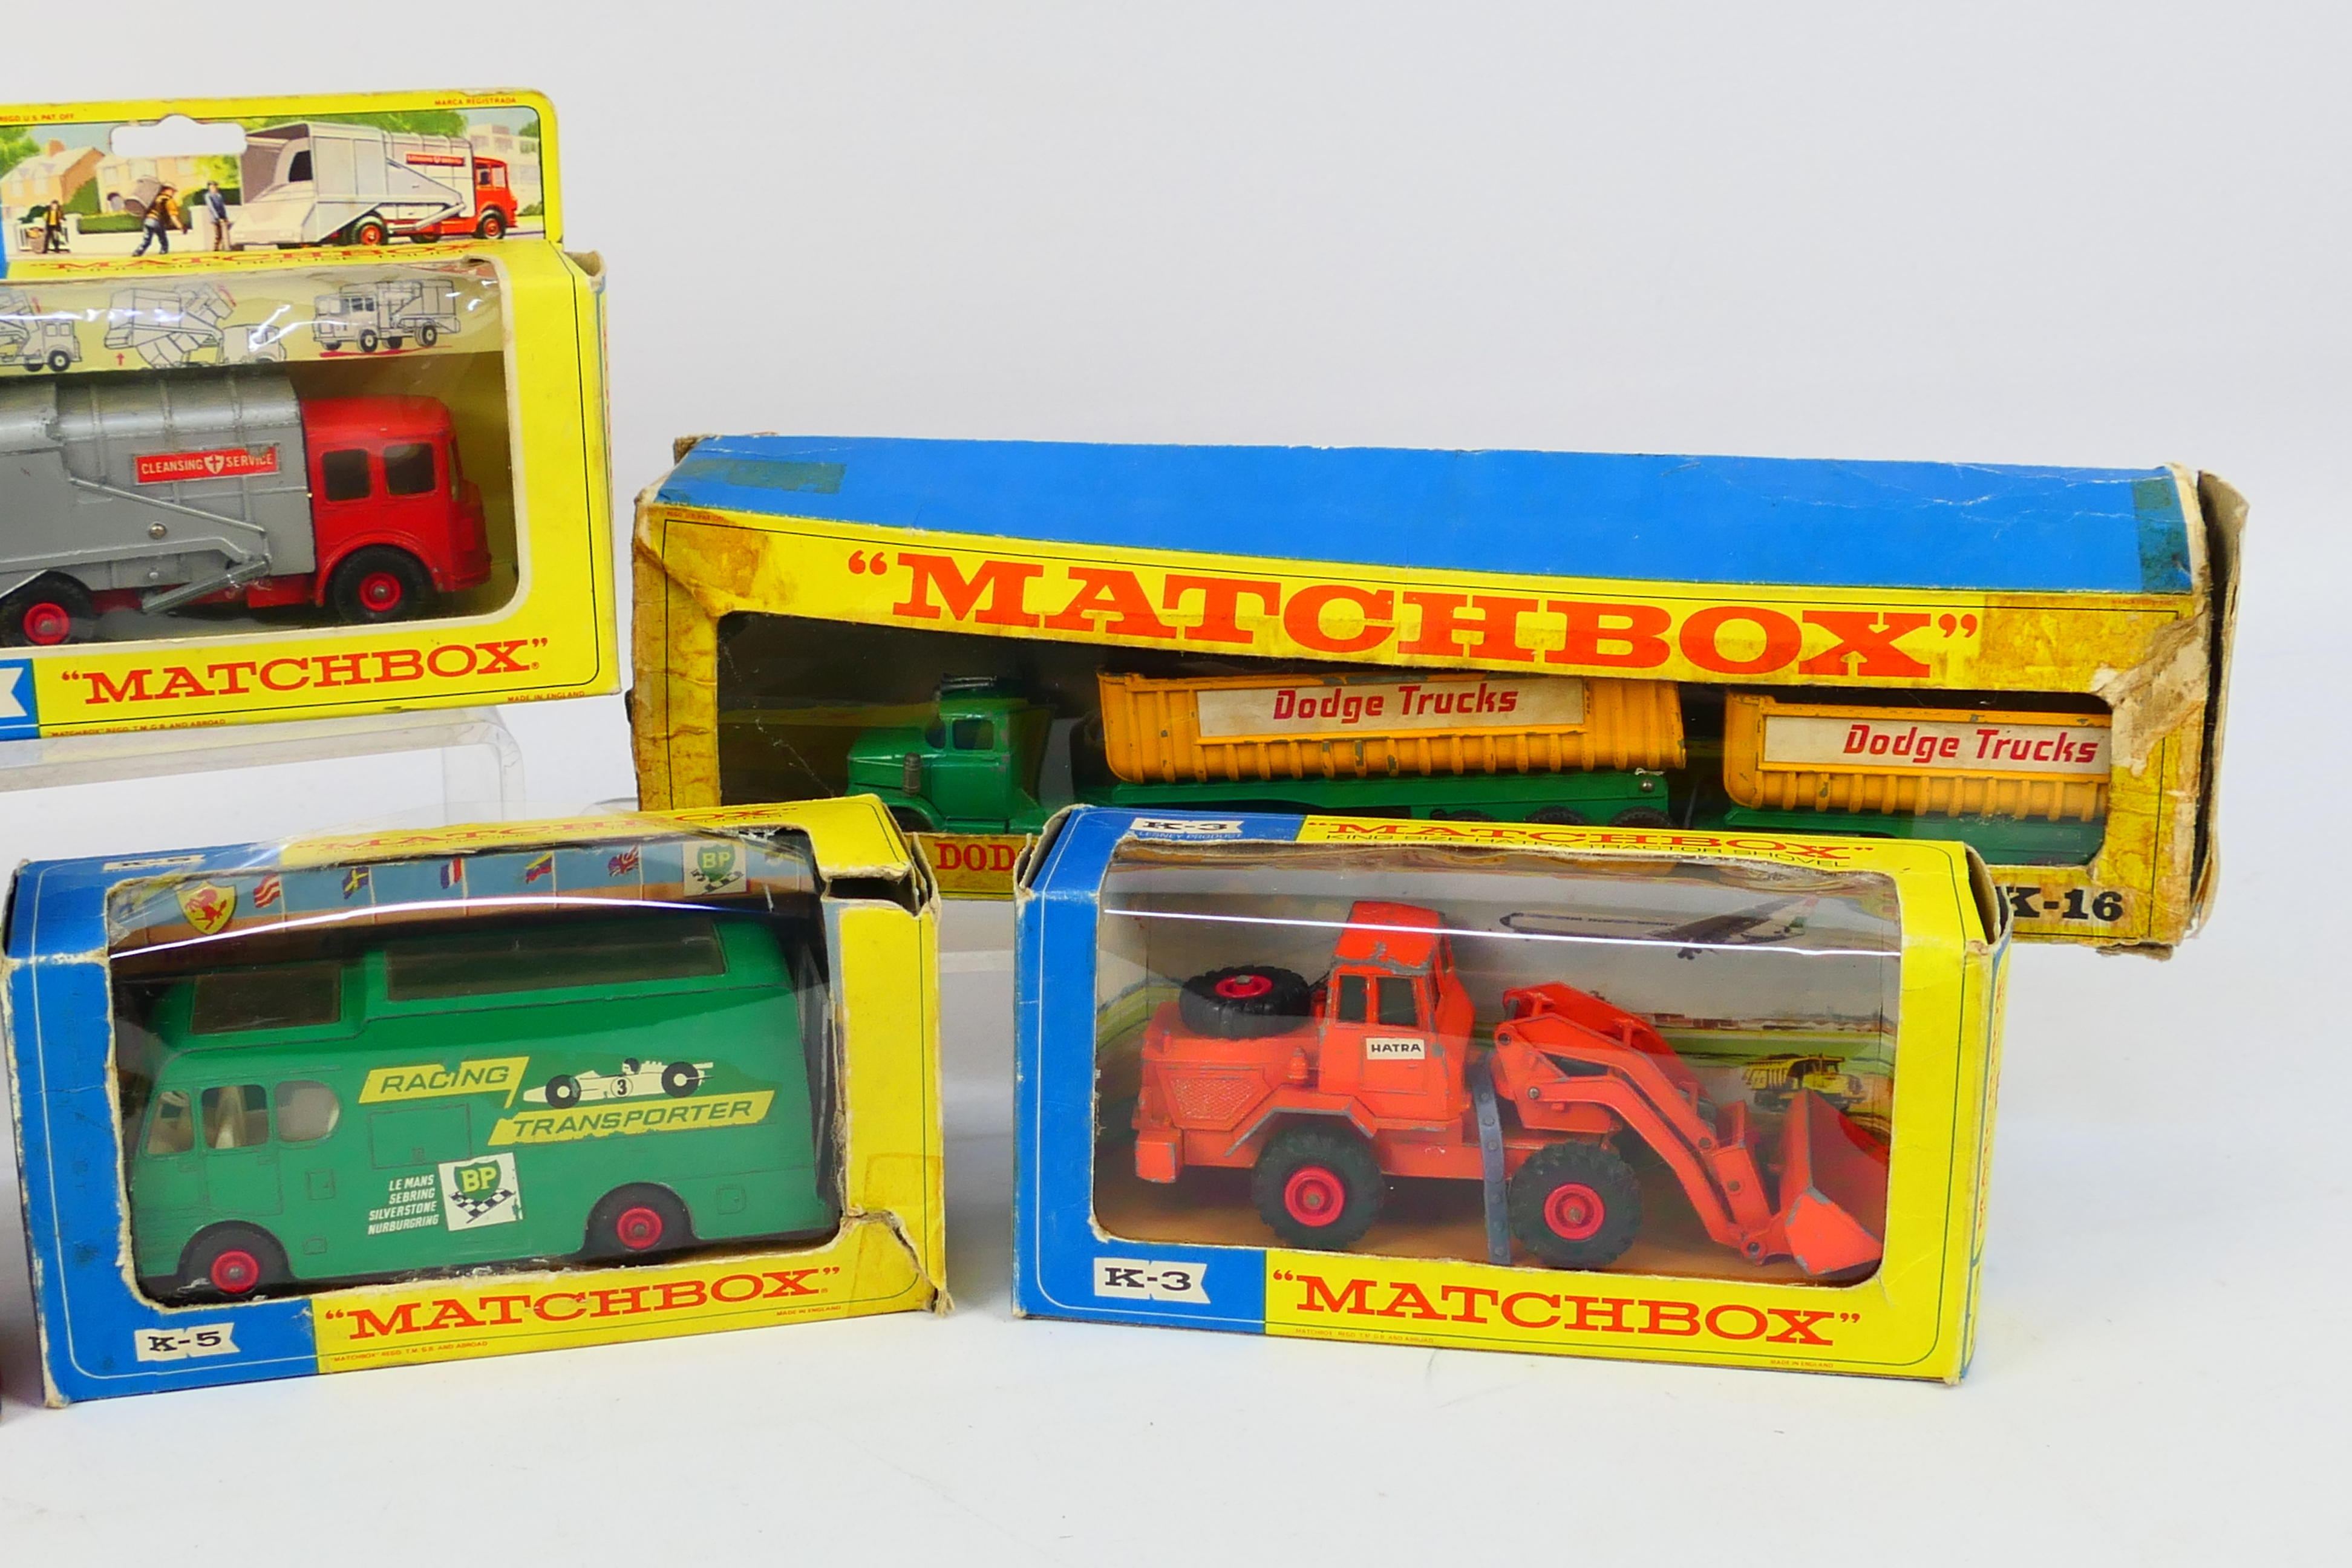 Matchbox - 6 x boxed King Size trucks including Dodge truck with twin tippers # K-16, - Image 3 of 3